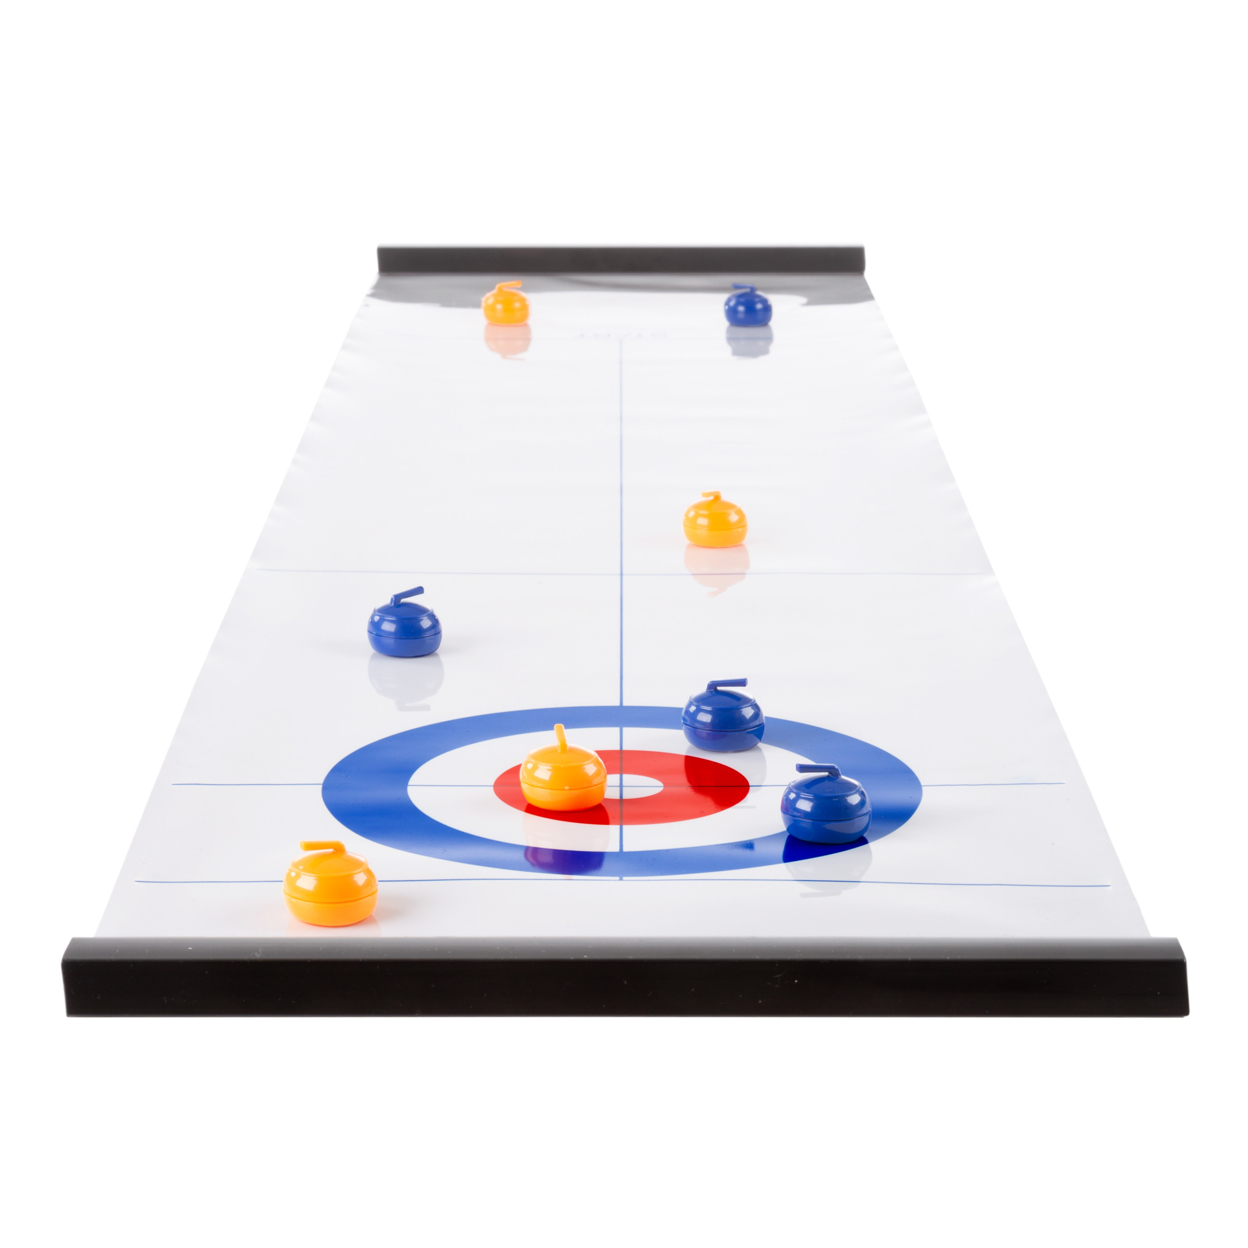 Tabletop Curling Game Portable Indoor Desktop Roll Up Magnetic Competition Board Game With Eight Stones 47 Inches Long